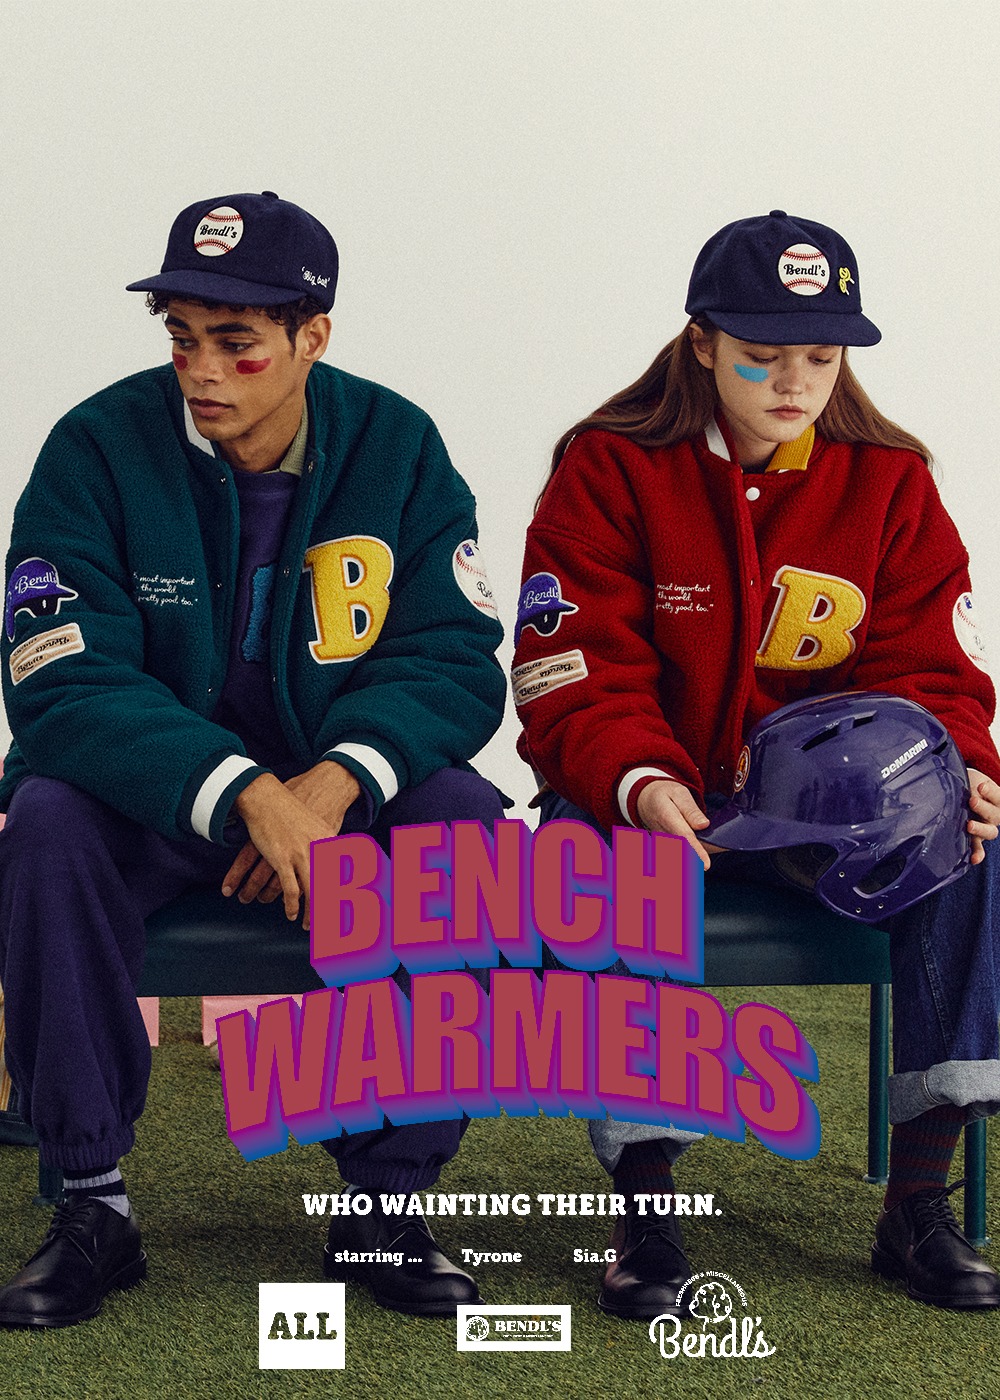 BENCH WARMERS